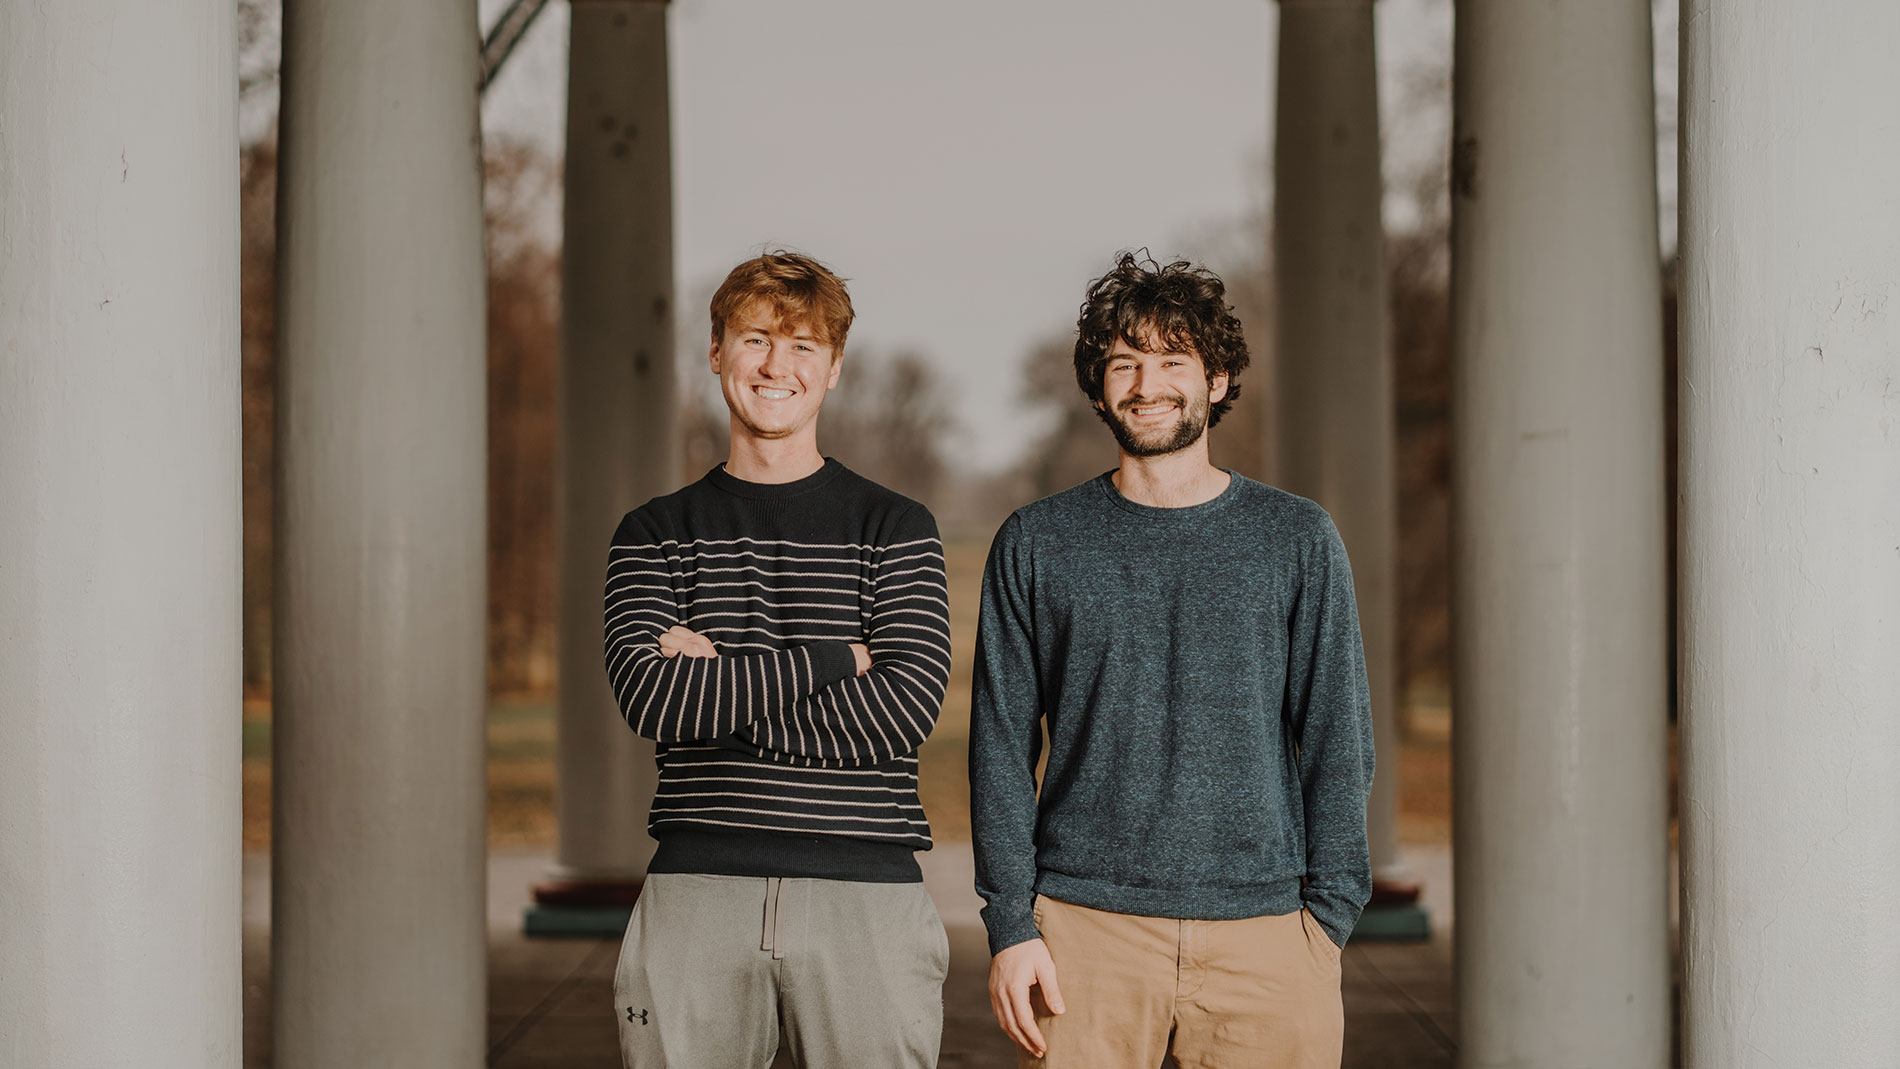 from left, find your farmer co-founder spencer stewart and ceo noah offenkrantz